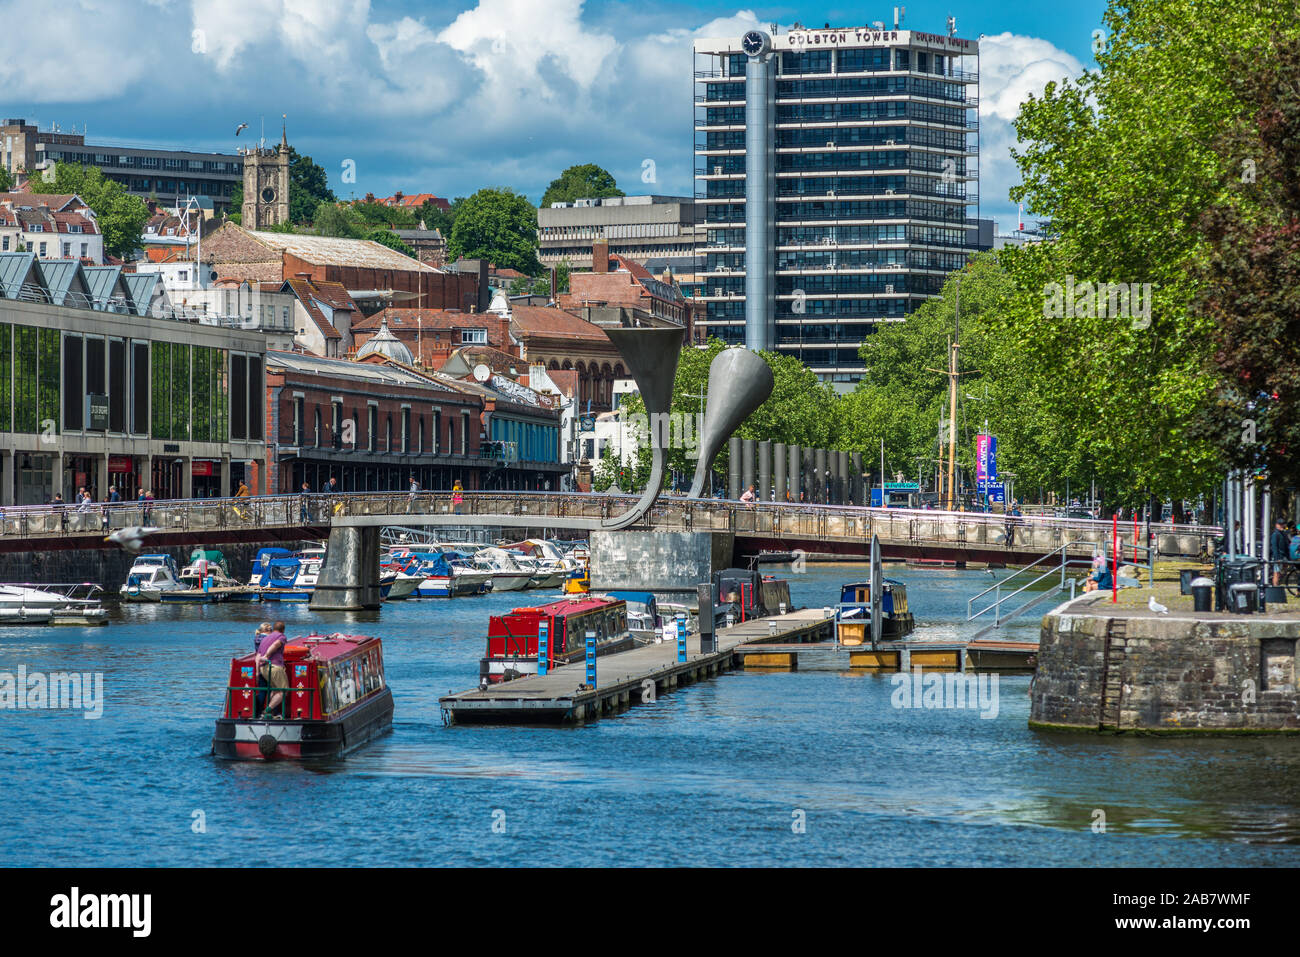 City skyline with canal boats at Pero's Bridge across the Floating Harbour, Harbourside, Bristol, England, United Kingdom, Europe Stock Photo